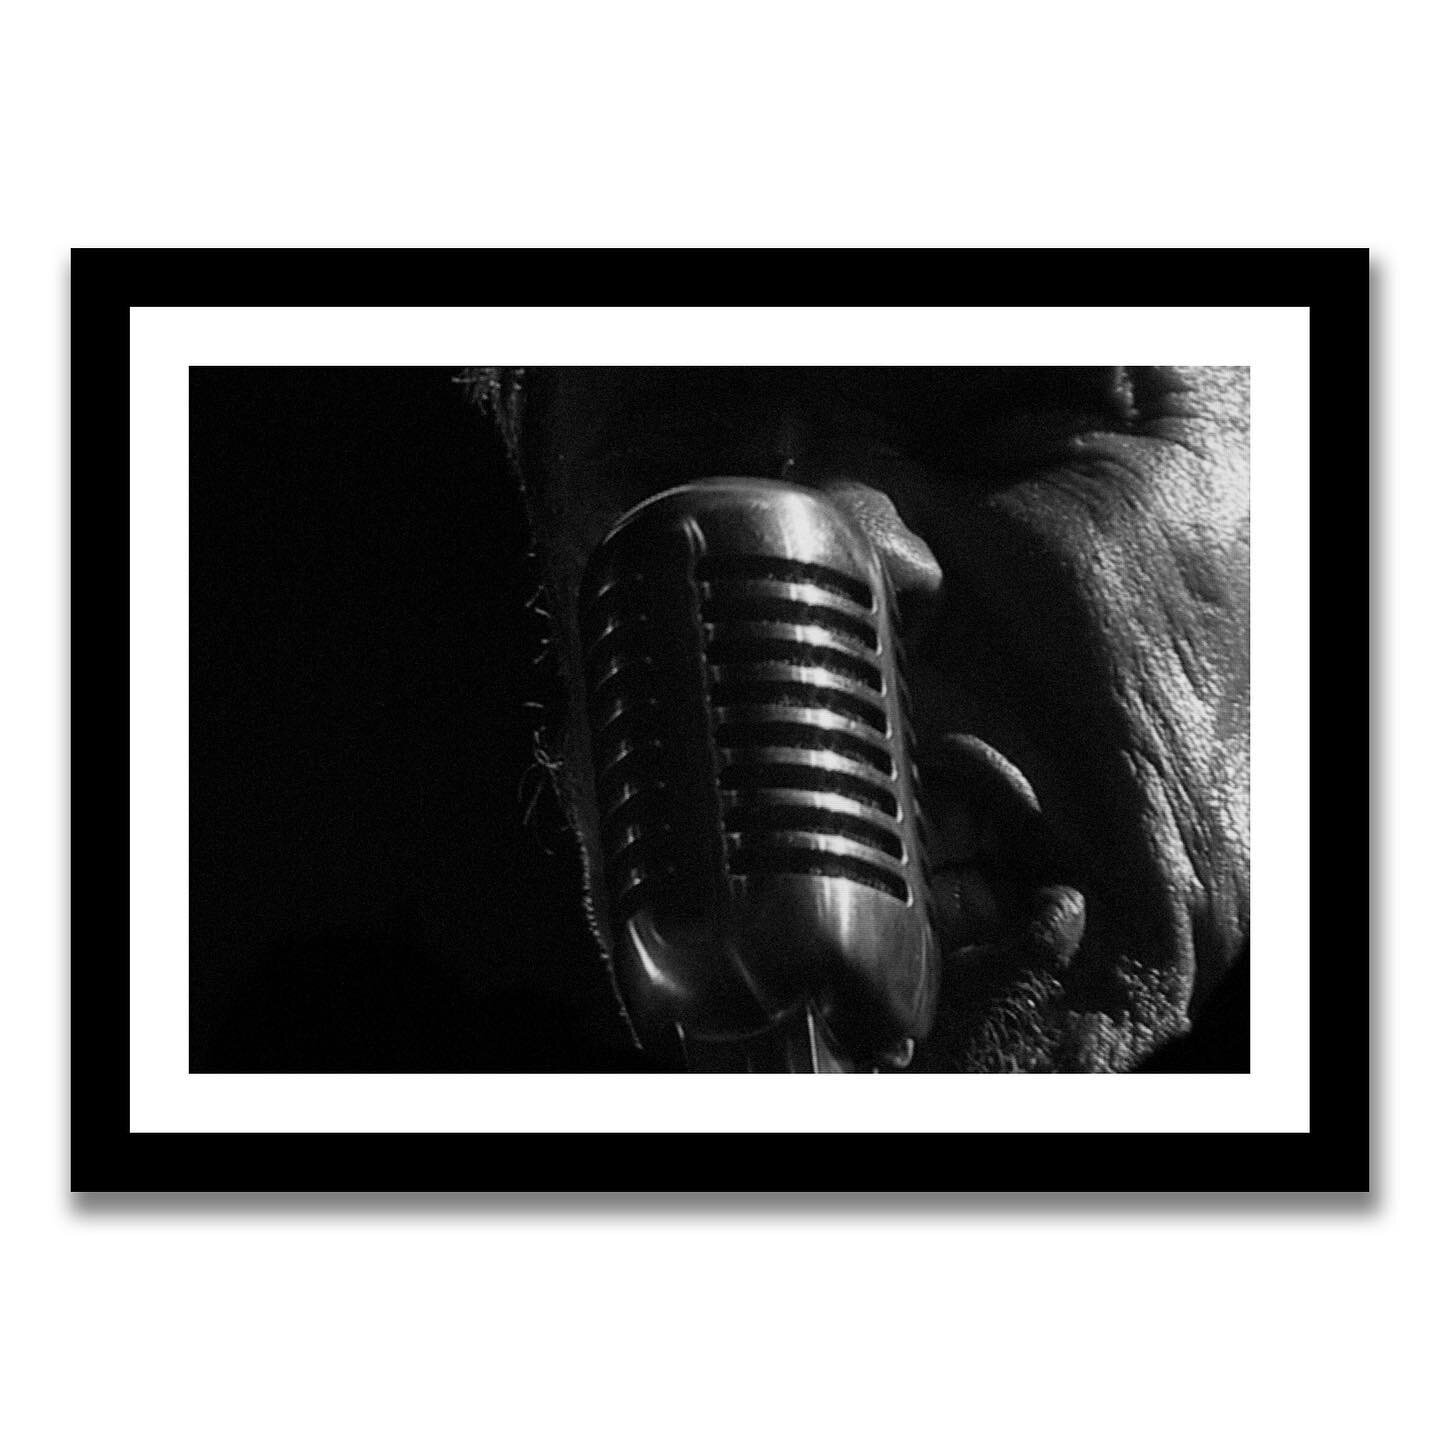 2nd piece &rarr; (go to the next post to see the 3rd piece of this artwork)
♫
Details of the posted photograph:
Metallica&rsquo;s James Hetfield, 2011.
3 pieces 35 x 50 cm each
Edition of 3 + 2AP
♫
&ldquo;Dying, dying, someone told me just recently, 